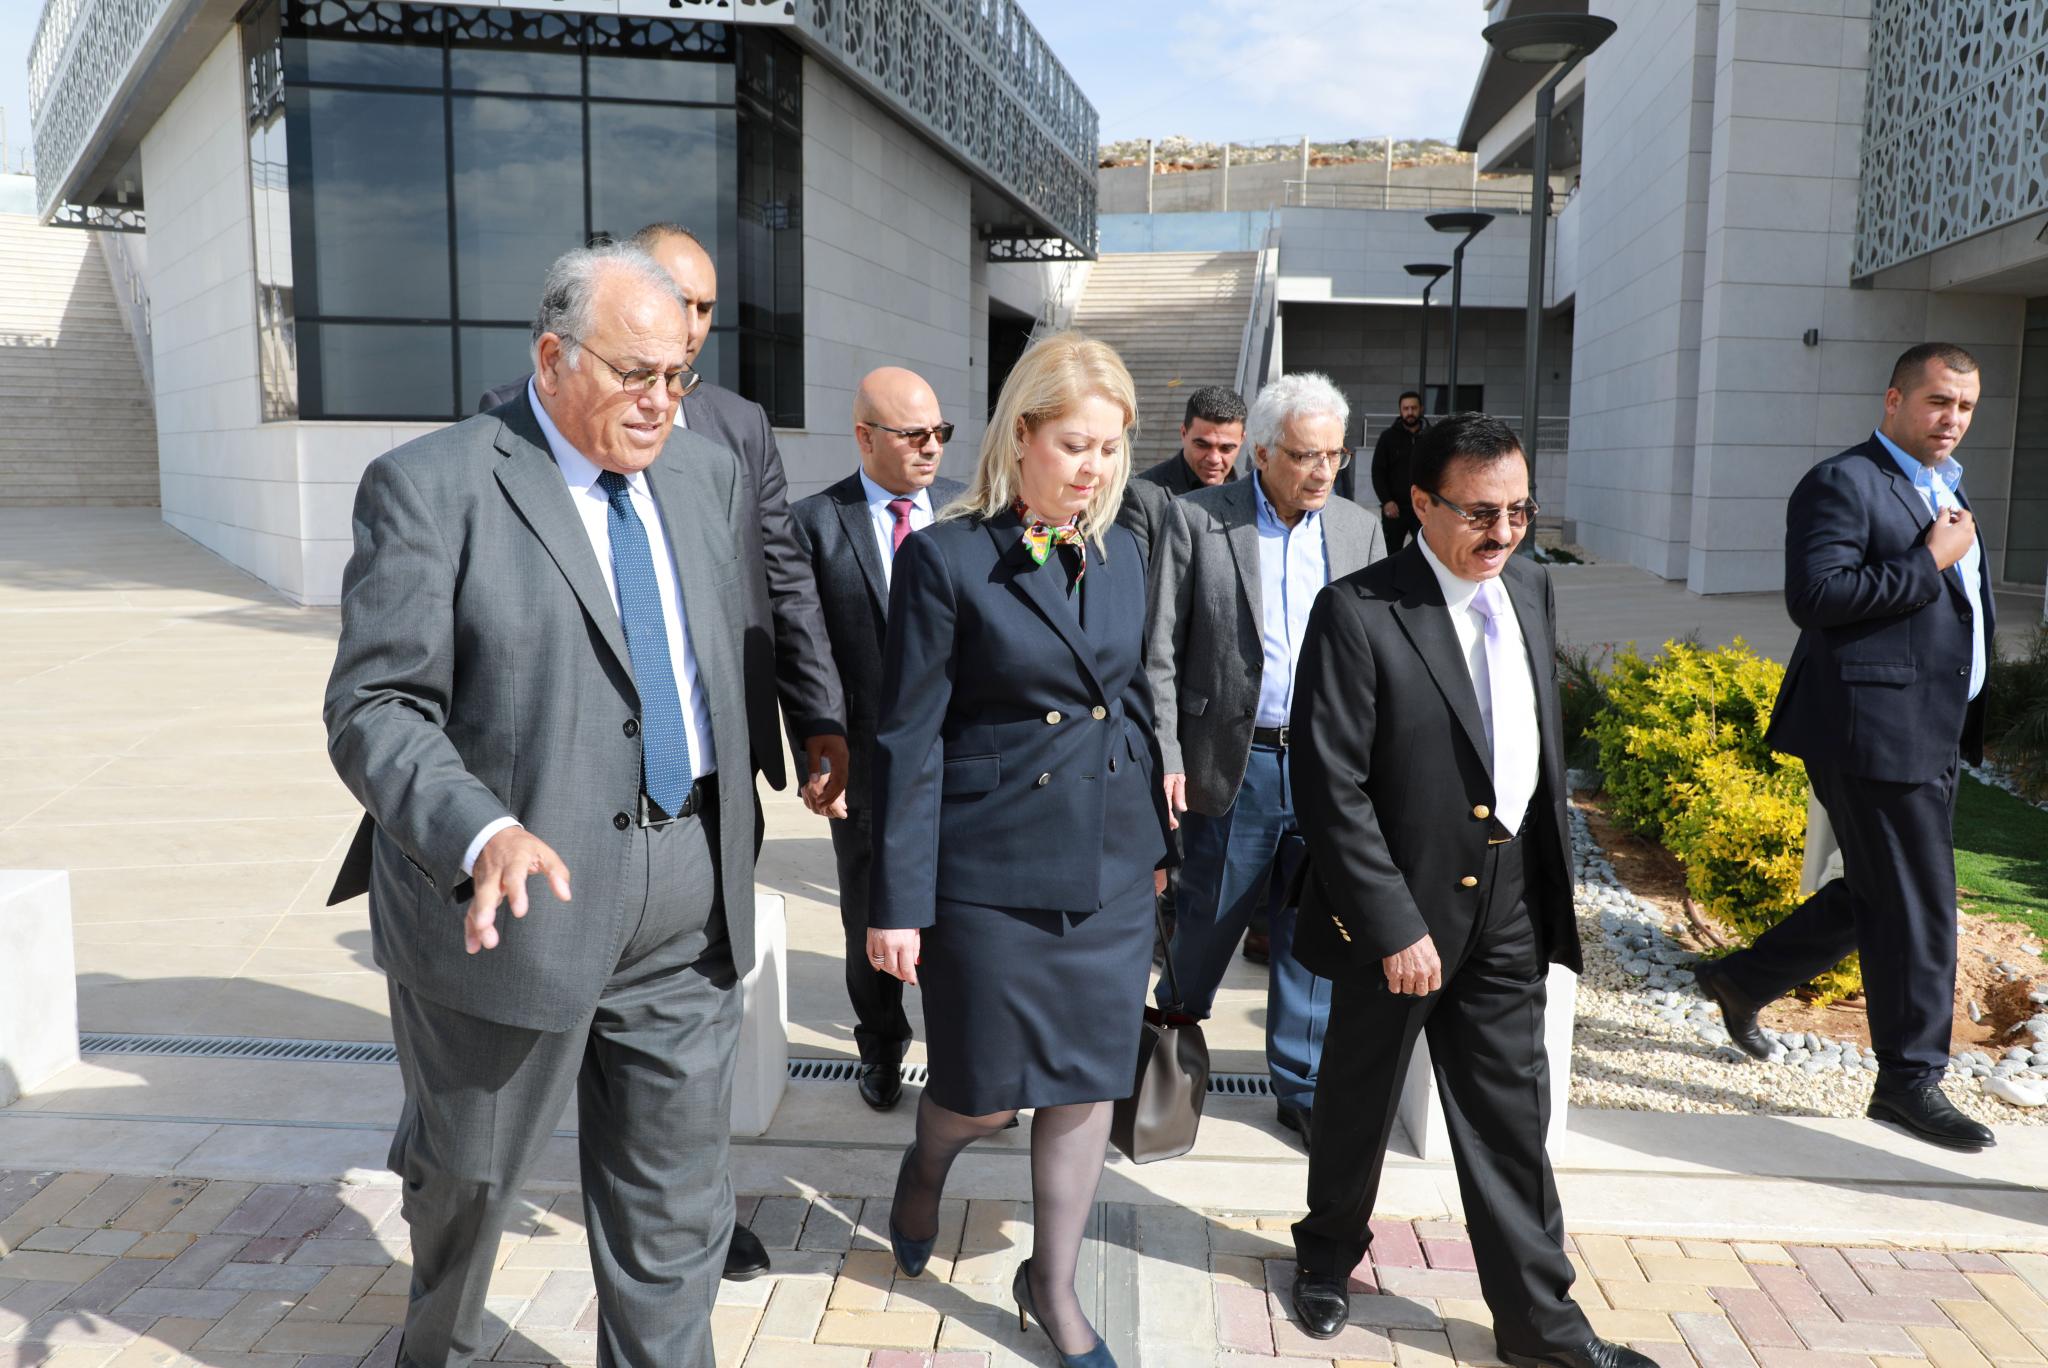 Part of the reception of the Advisor to the Prime Minister during her visit to the University